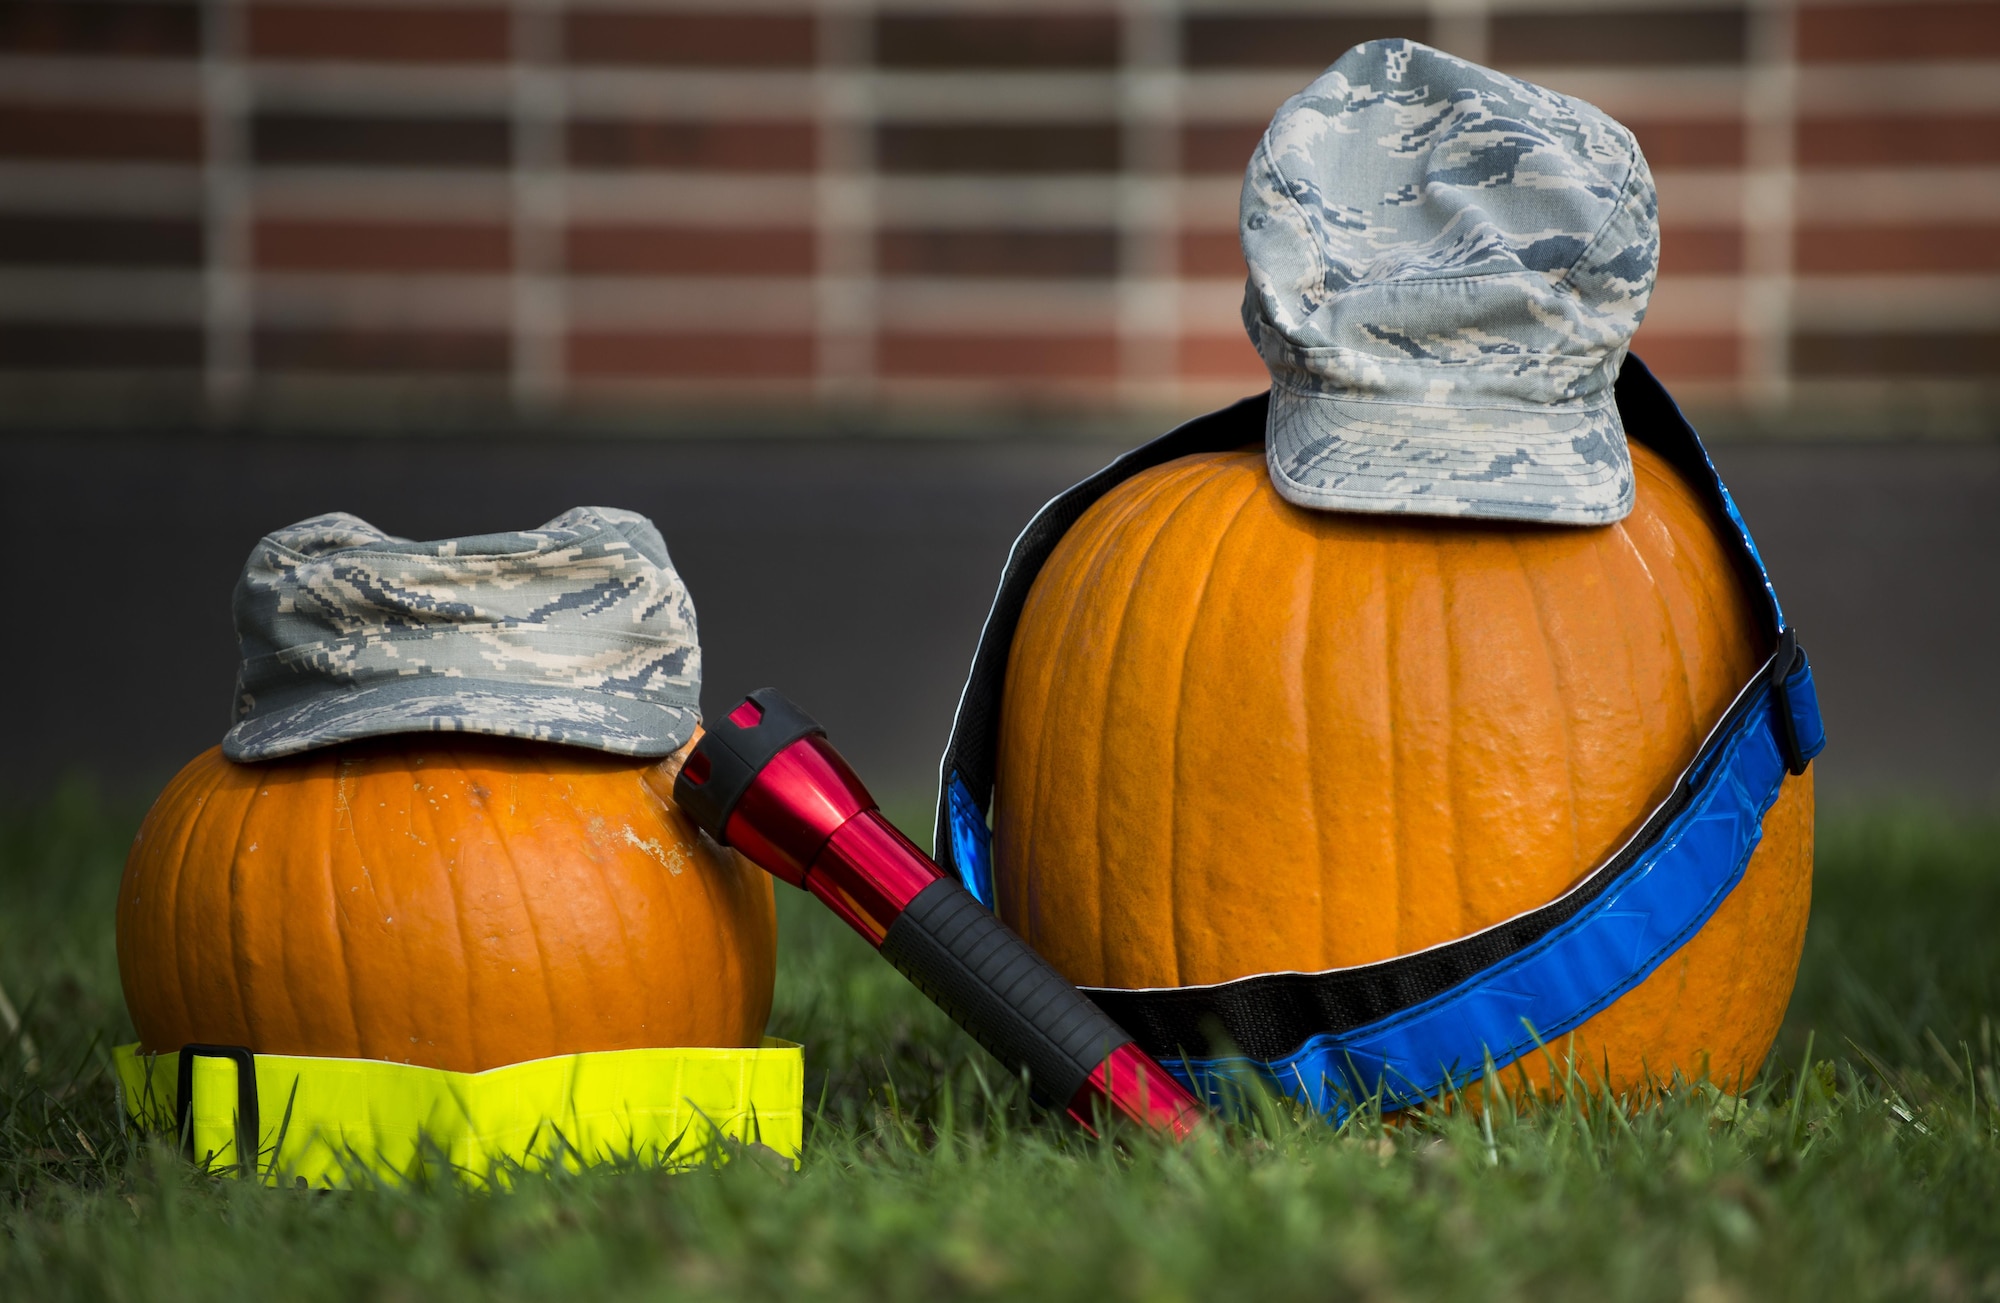 Trick or treat in base housing will be held Oct. 31, 2016, from 6-8 p.m. Off-duty officers from the 22nd Security Forces Squadron will team up with volunteers to look out for the participants and ensure everything runs smoothly. (U.S. Air Force photo)